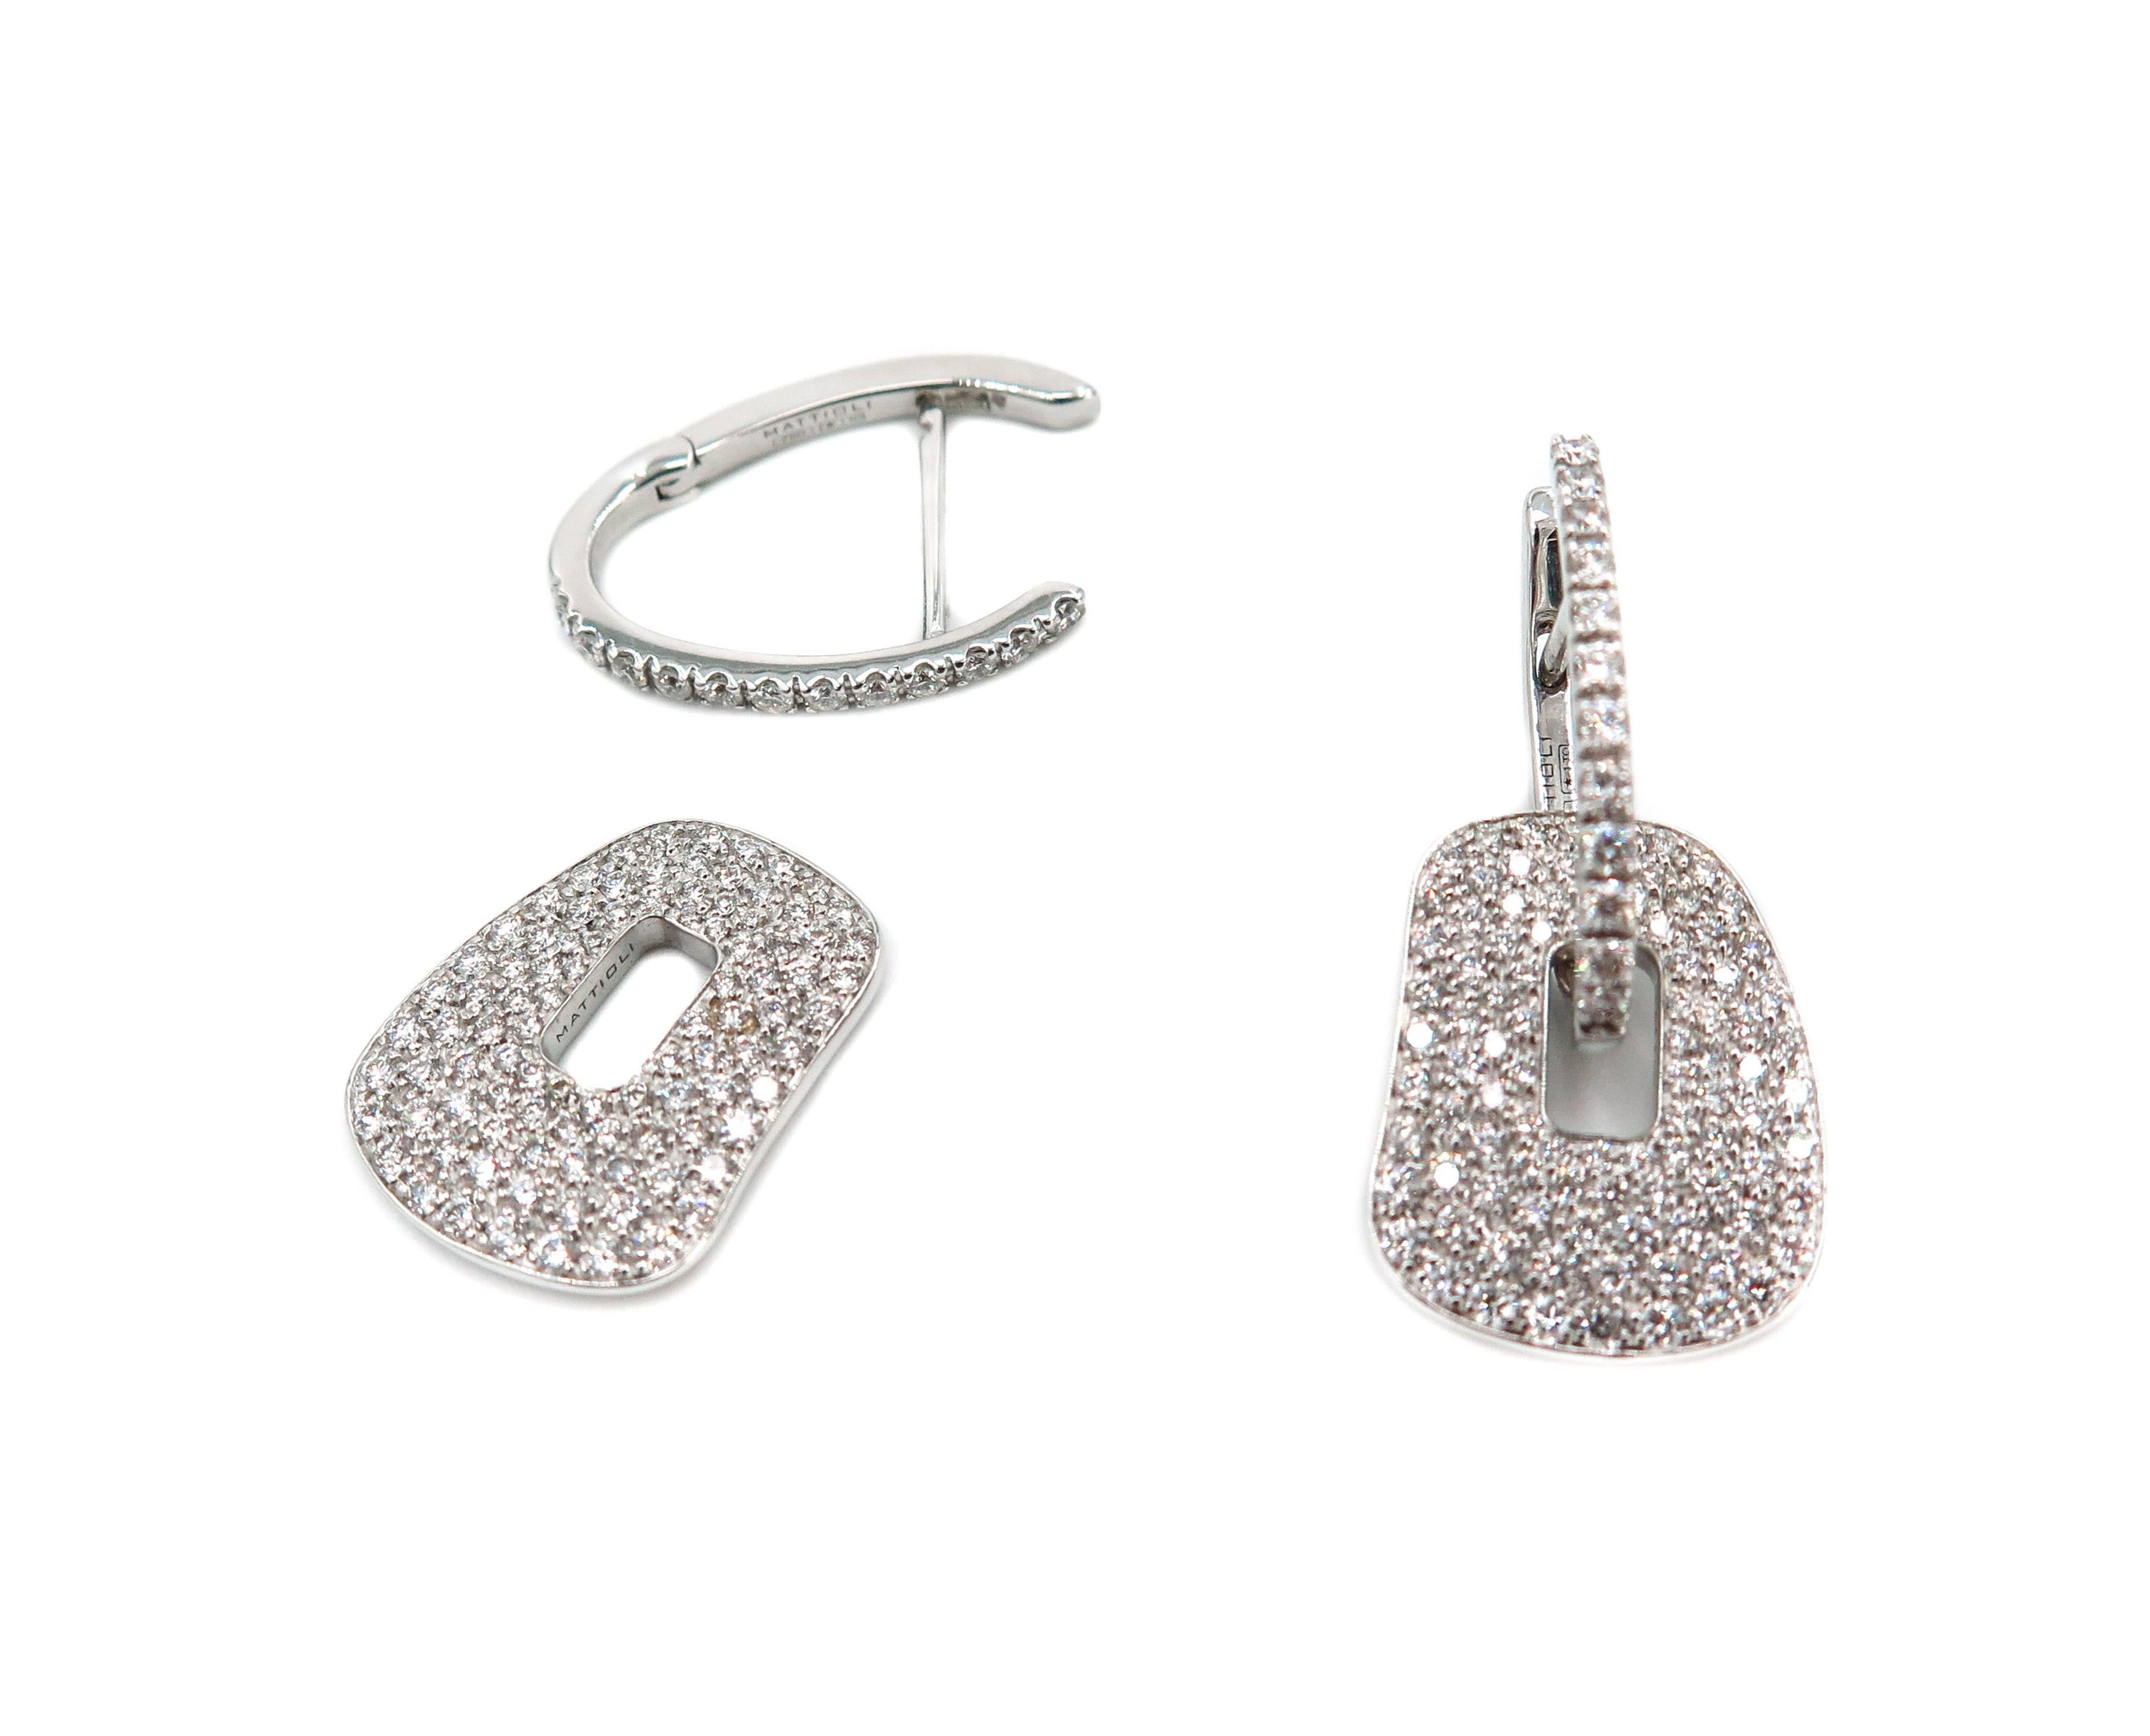 This diamond pave puzzle earrings, make up a little precious game, an extravagant caprice, that allows you to change the trapezoid based on the look and mood of the wearer.
Encrusted with 1.77 carats of round white diamonds pave set on the removable